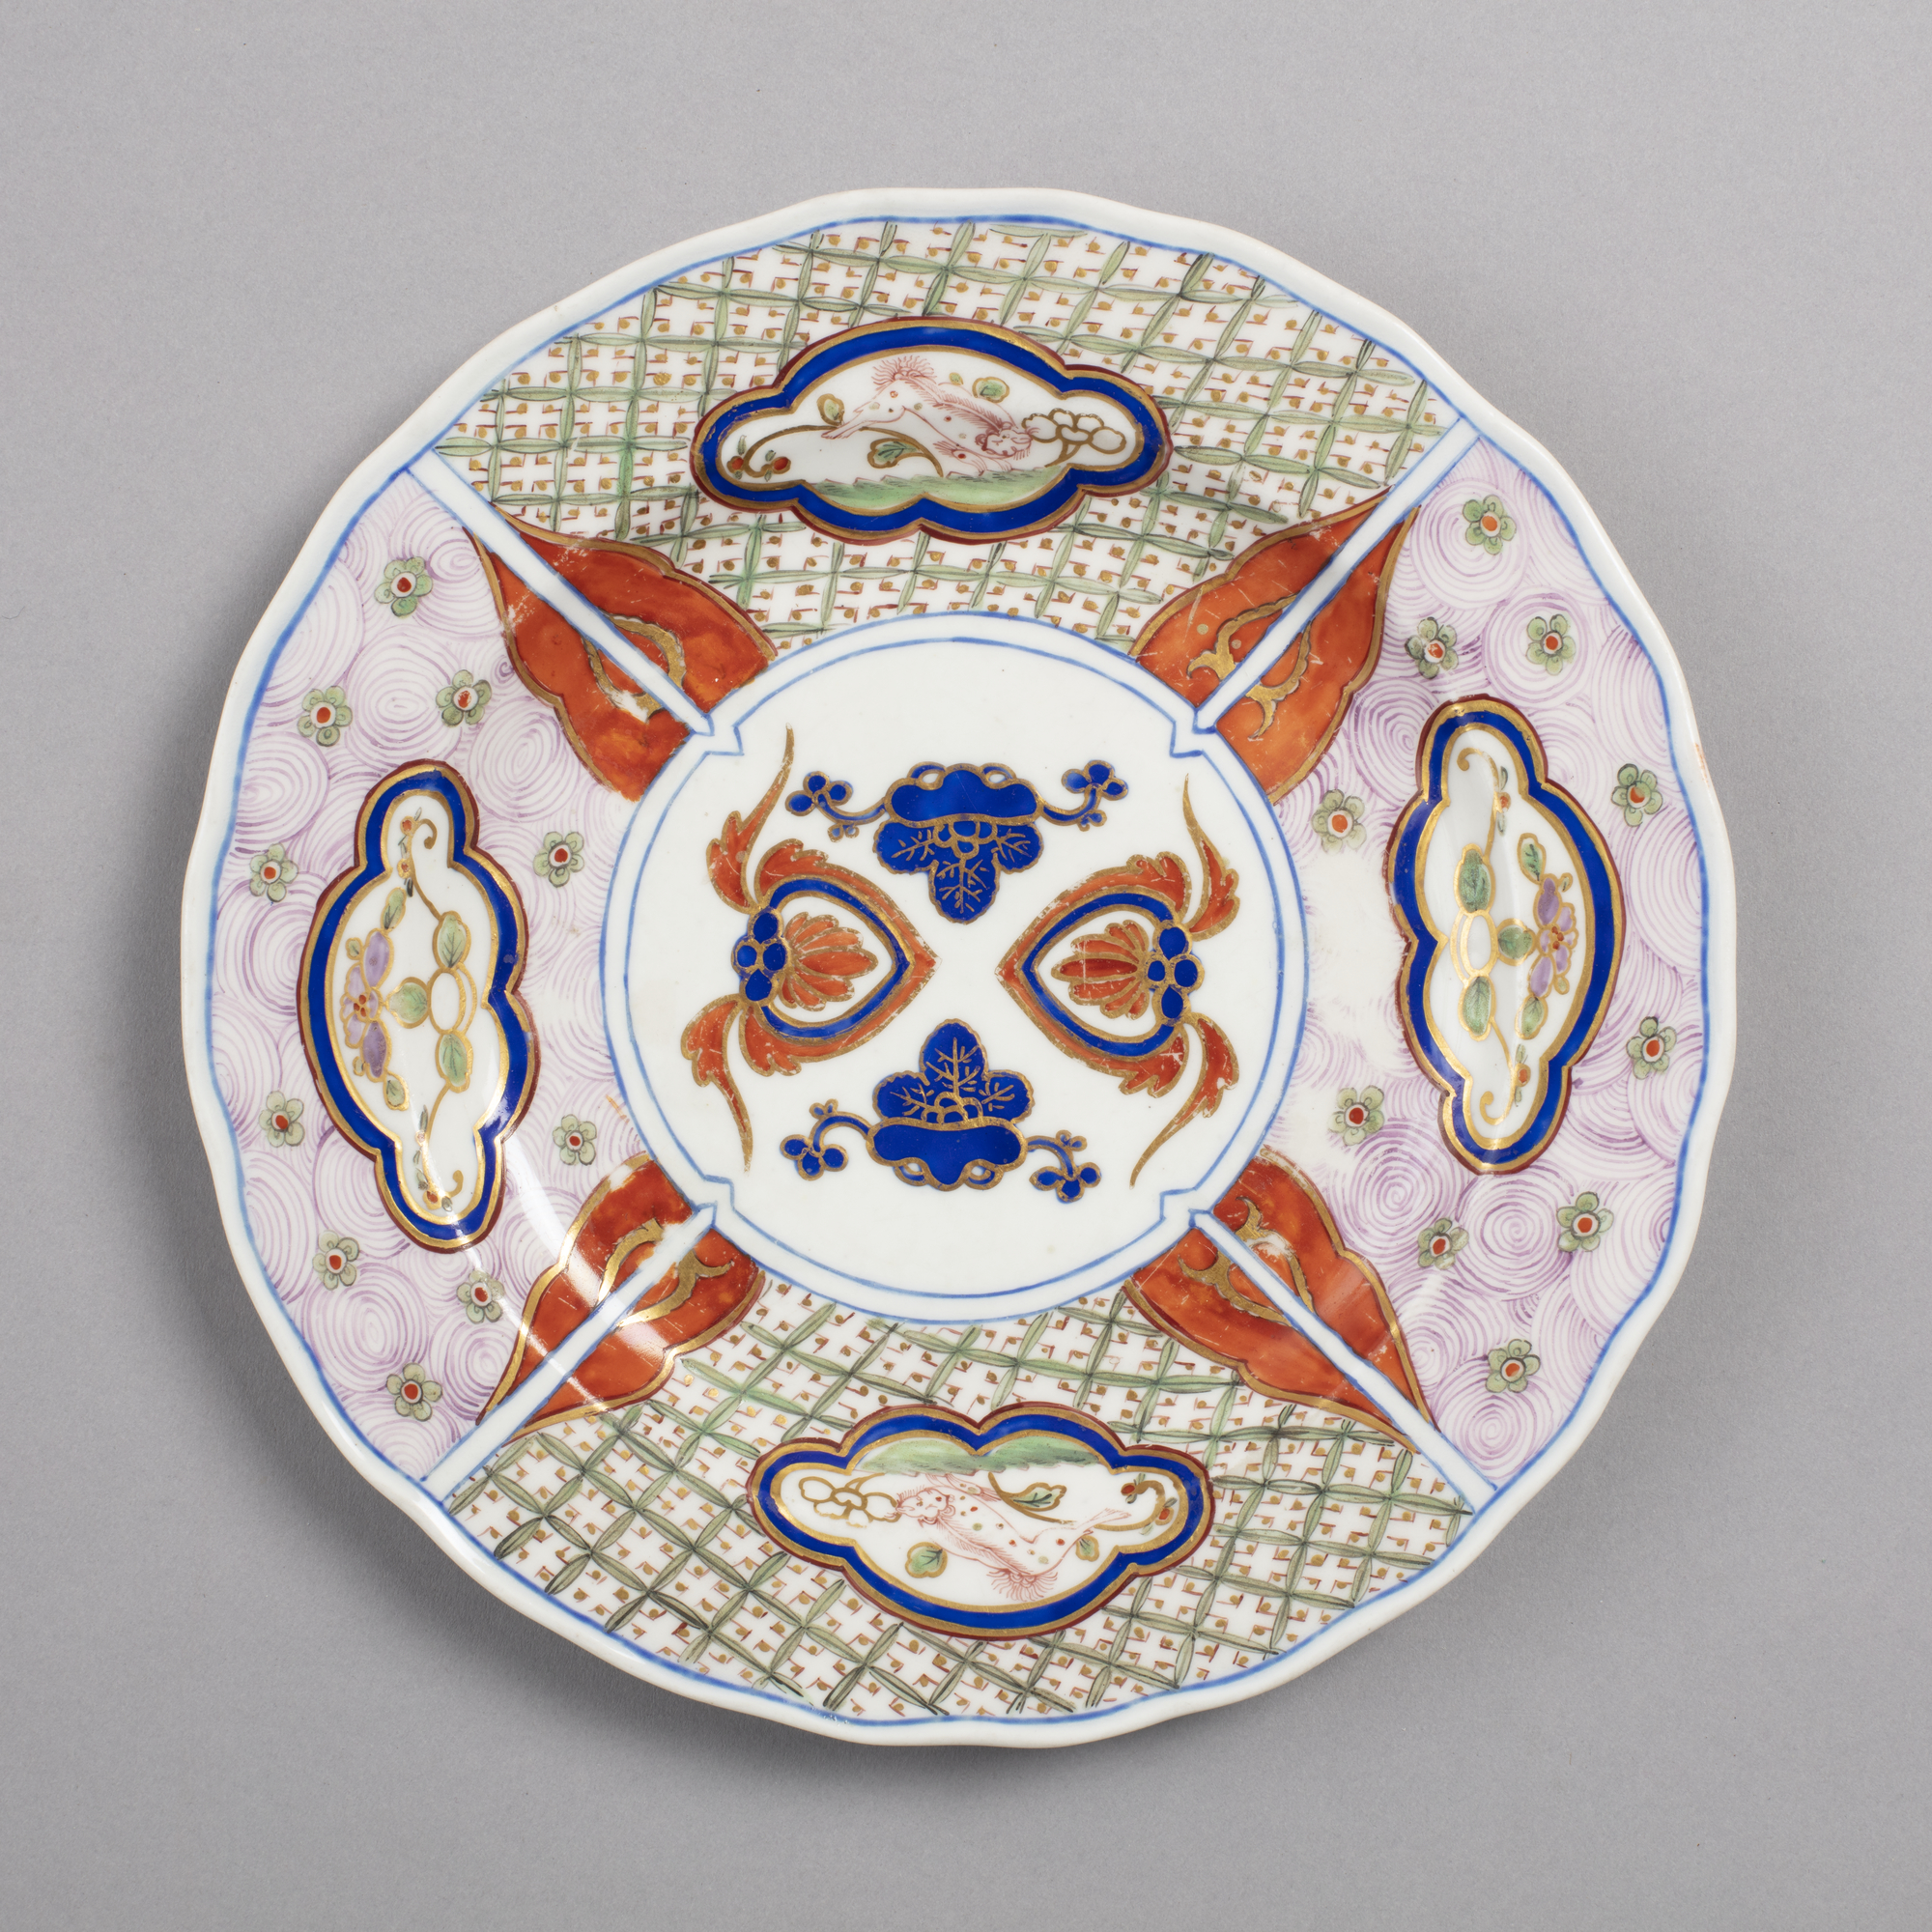 Dish with design of Chinese lions and paulownia crests in red, blue and green